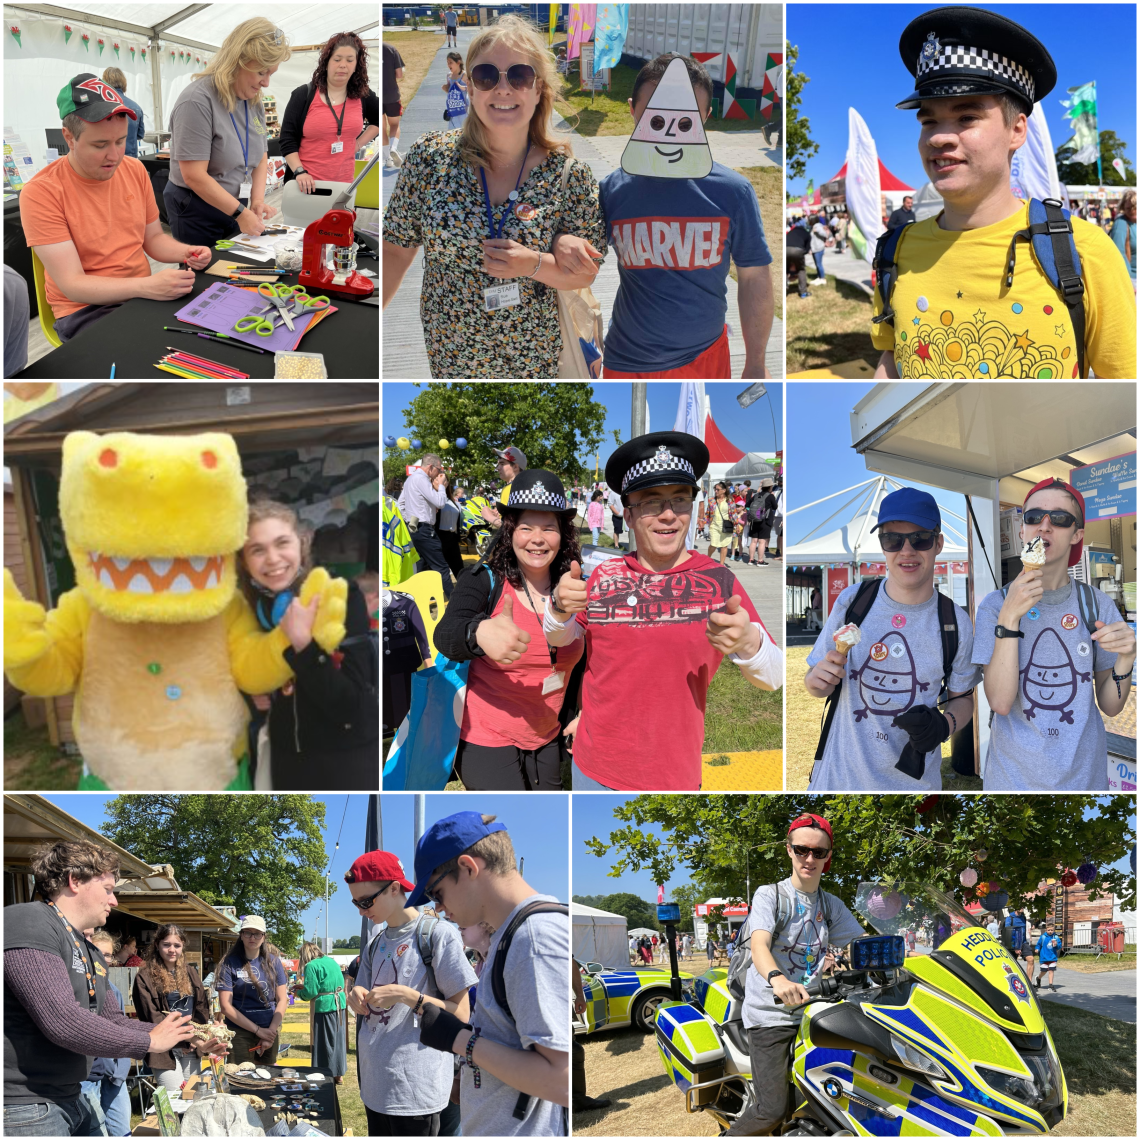 A collage of 9 Eisteddfod images. People in police hats, on police bike, making crafts, hugging mascots. Having fun.